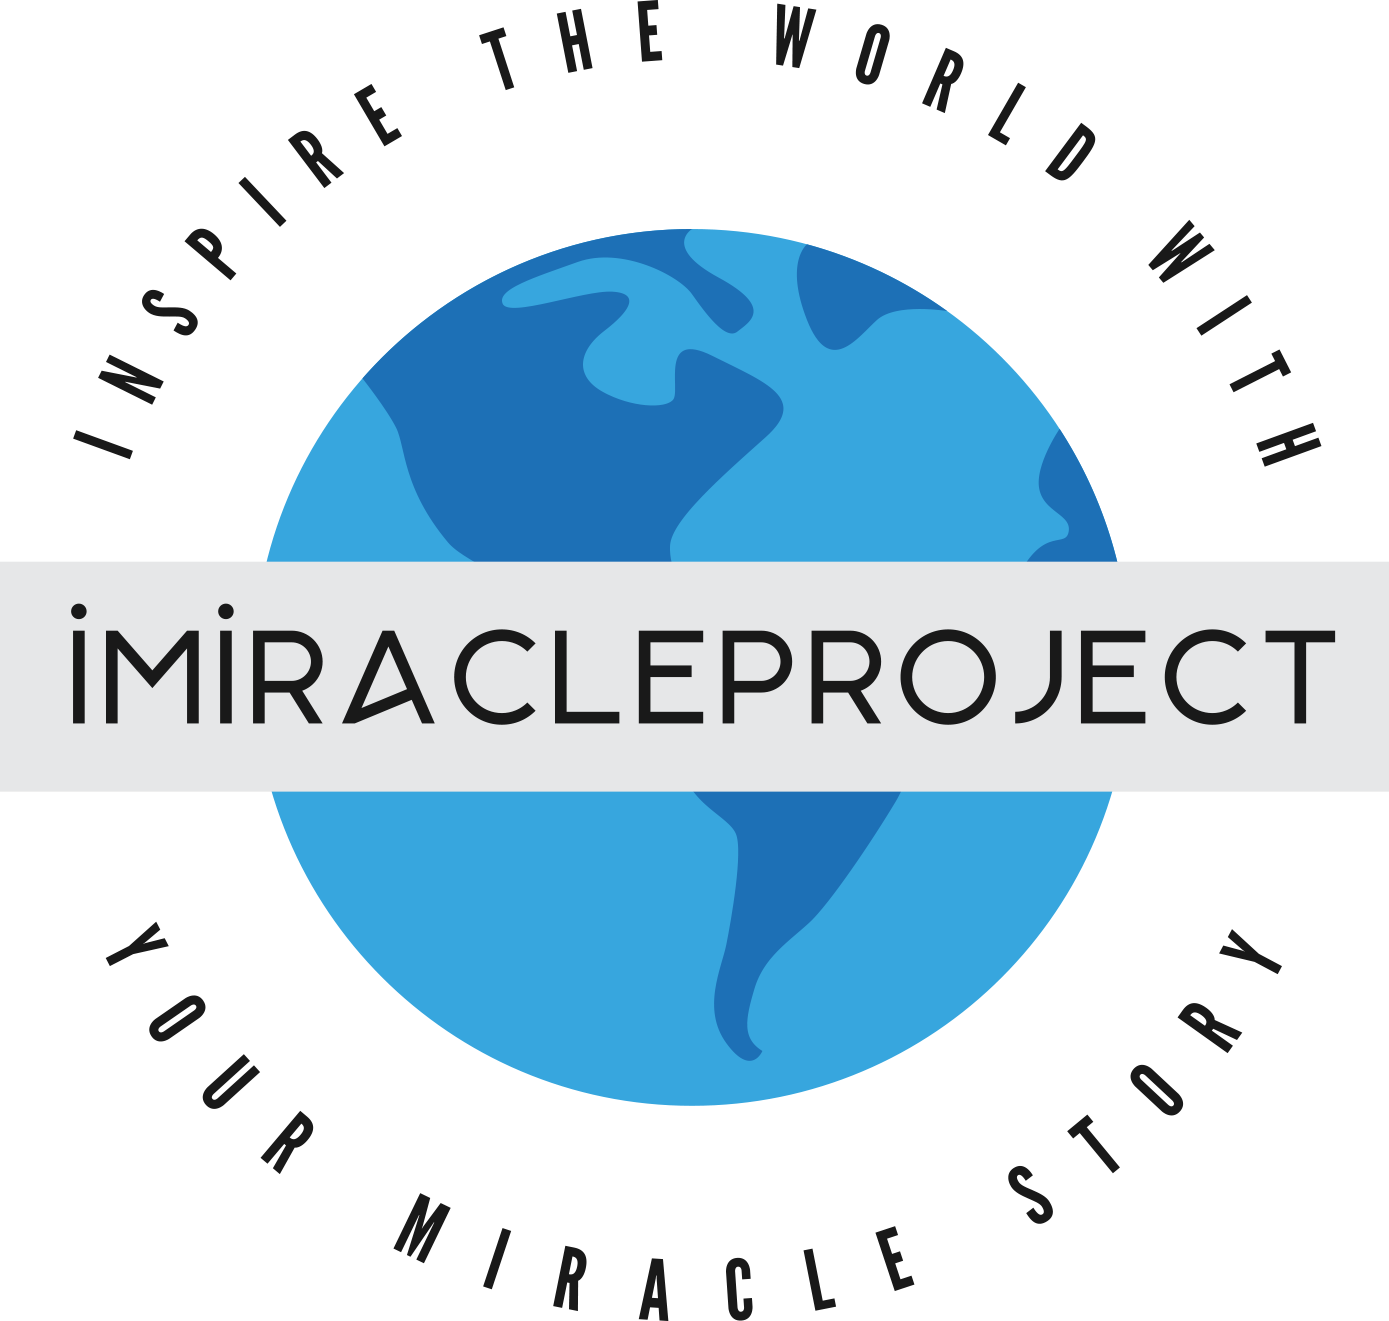 i Miracle Project